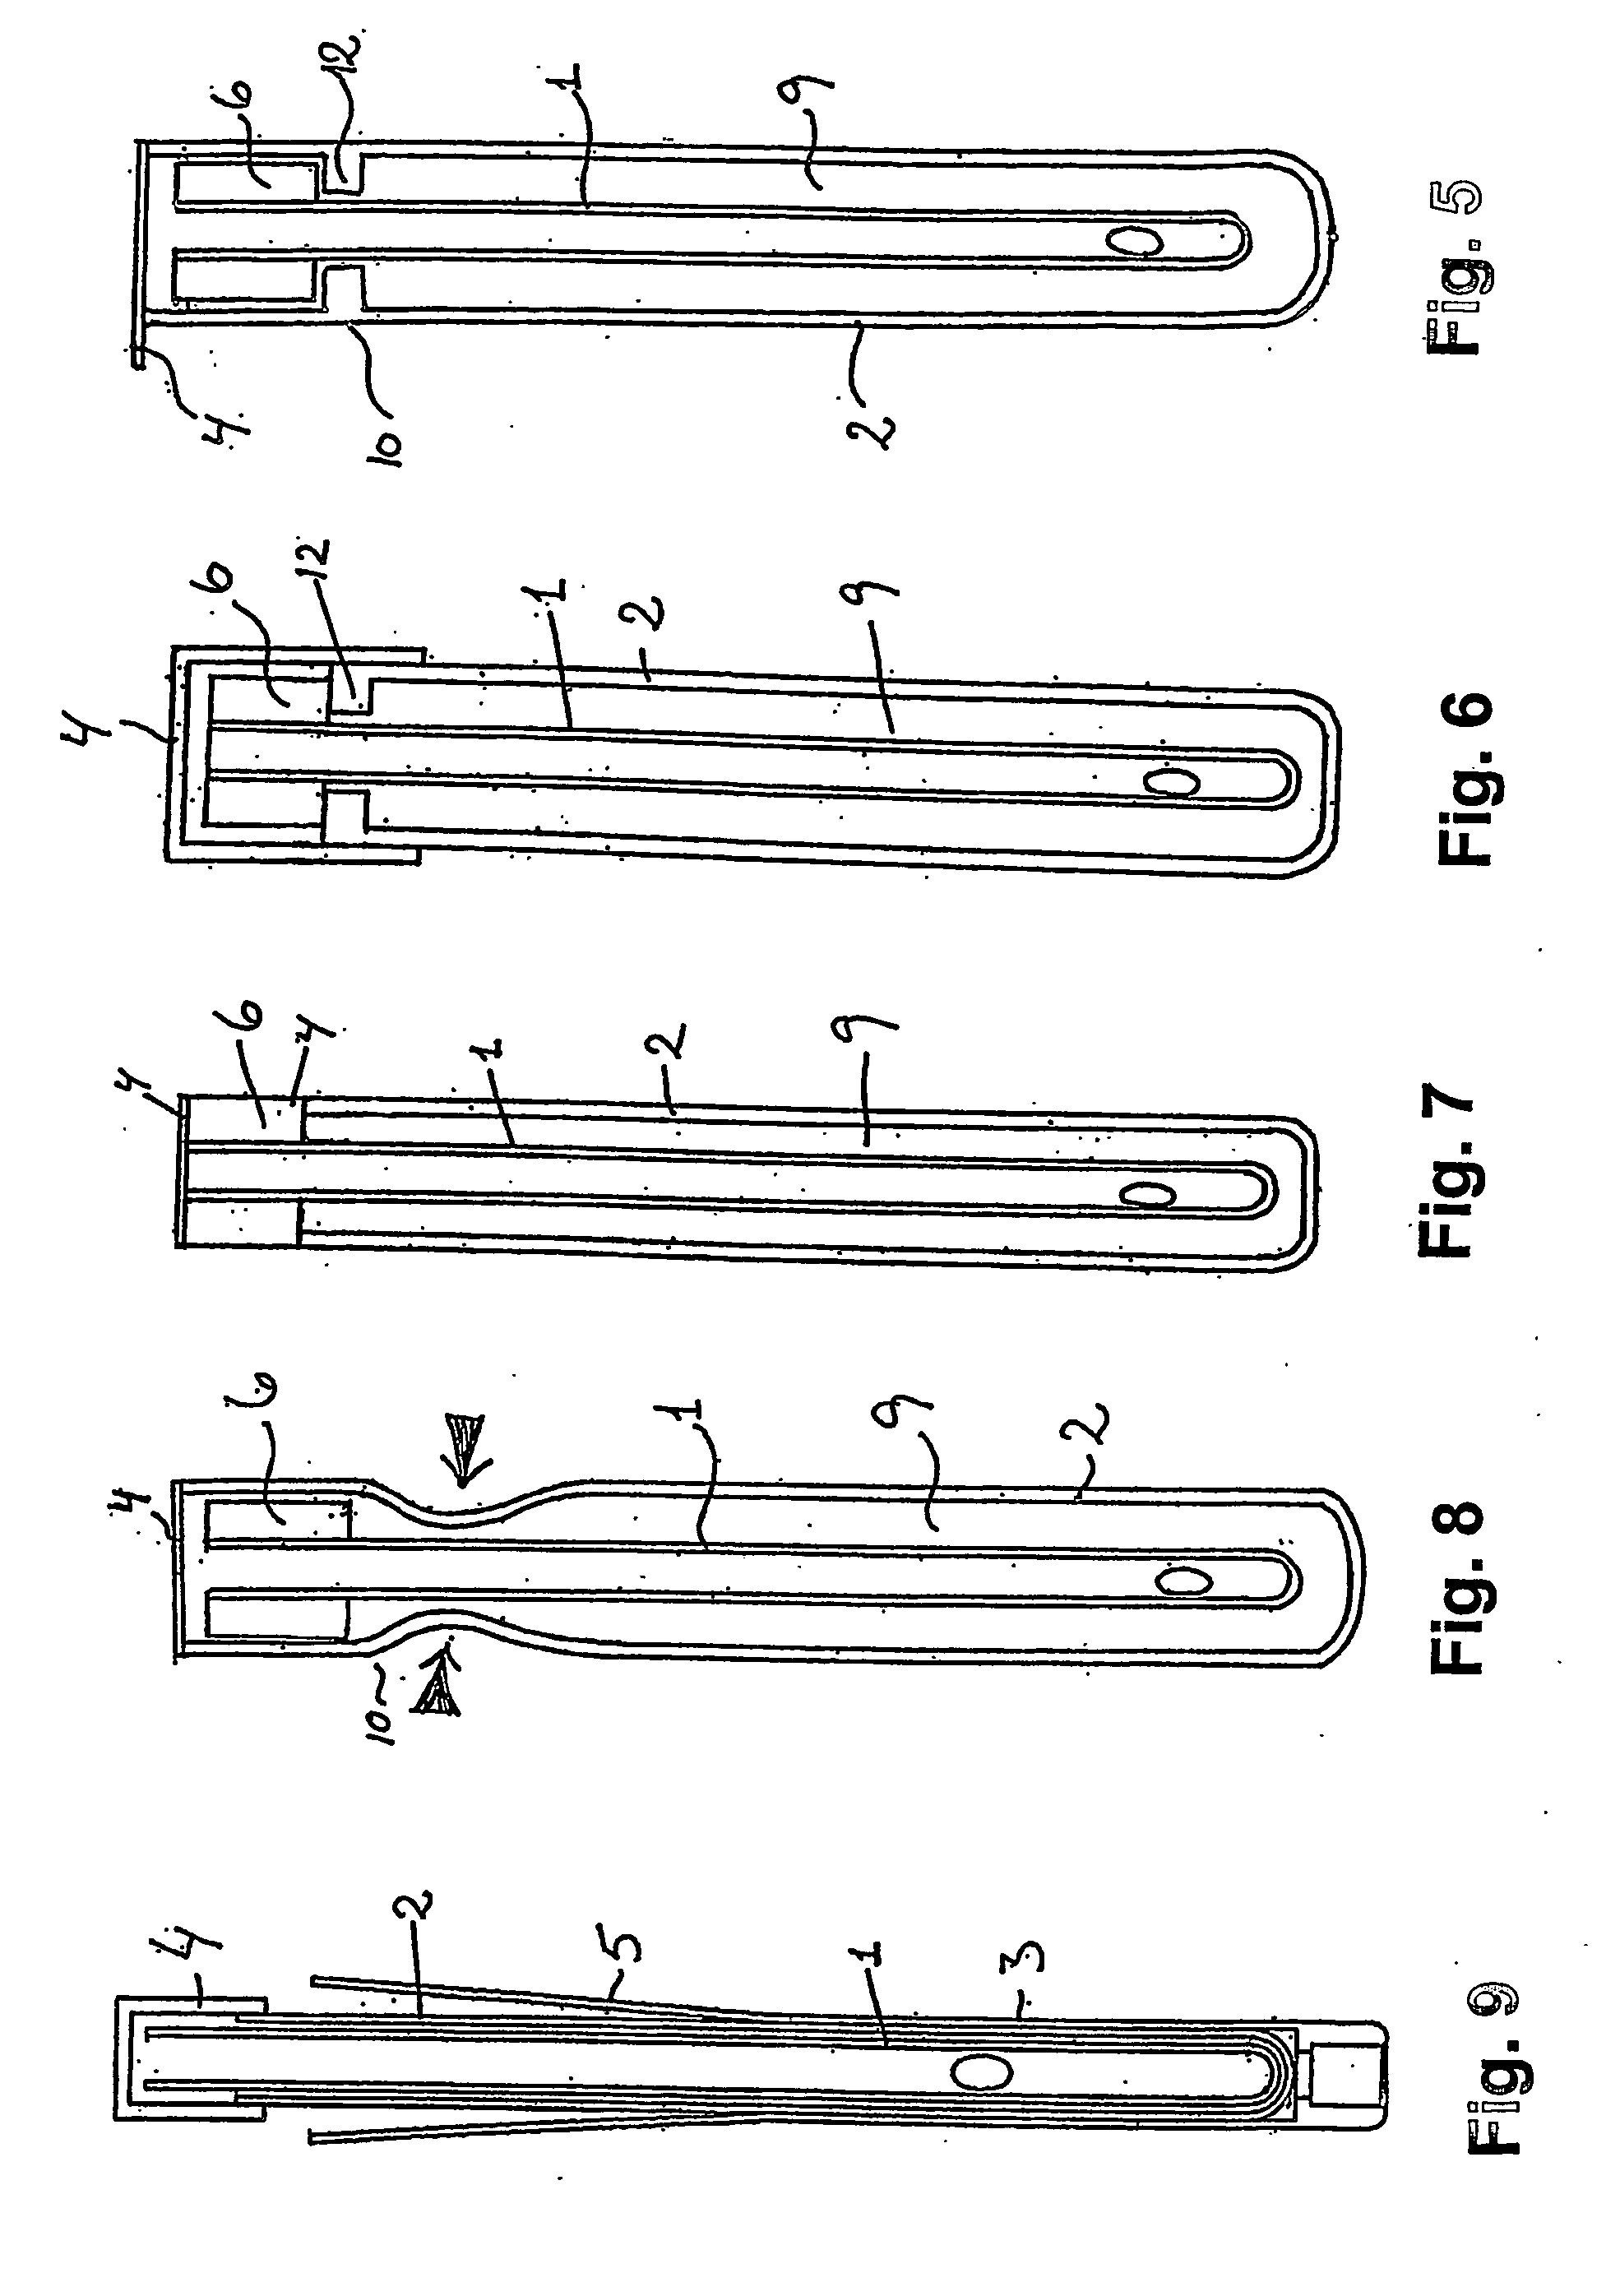 Catheter assembly with catheter handle and container